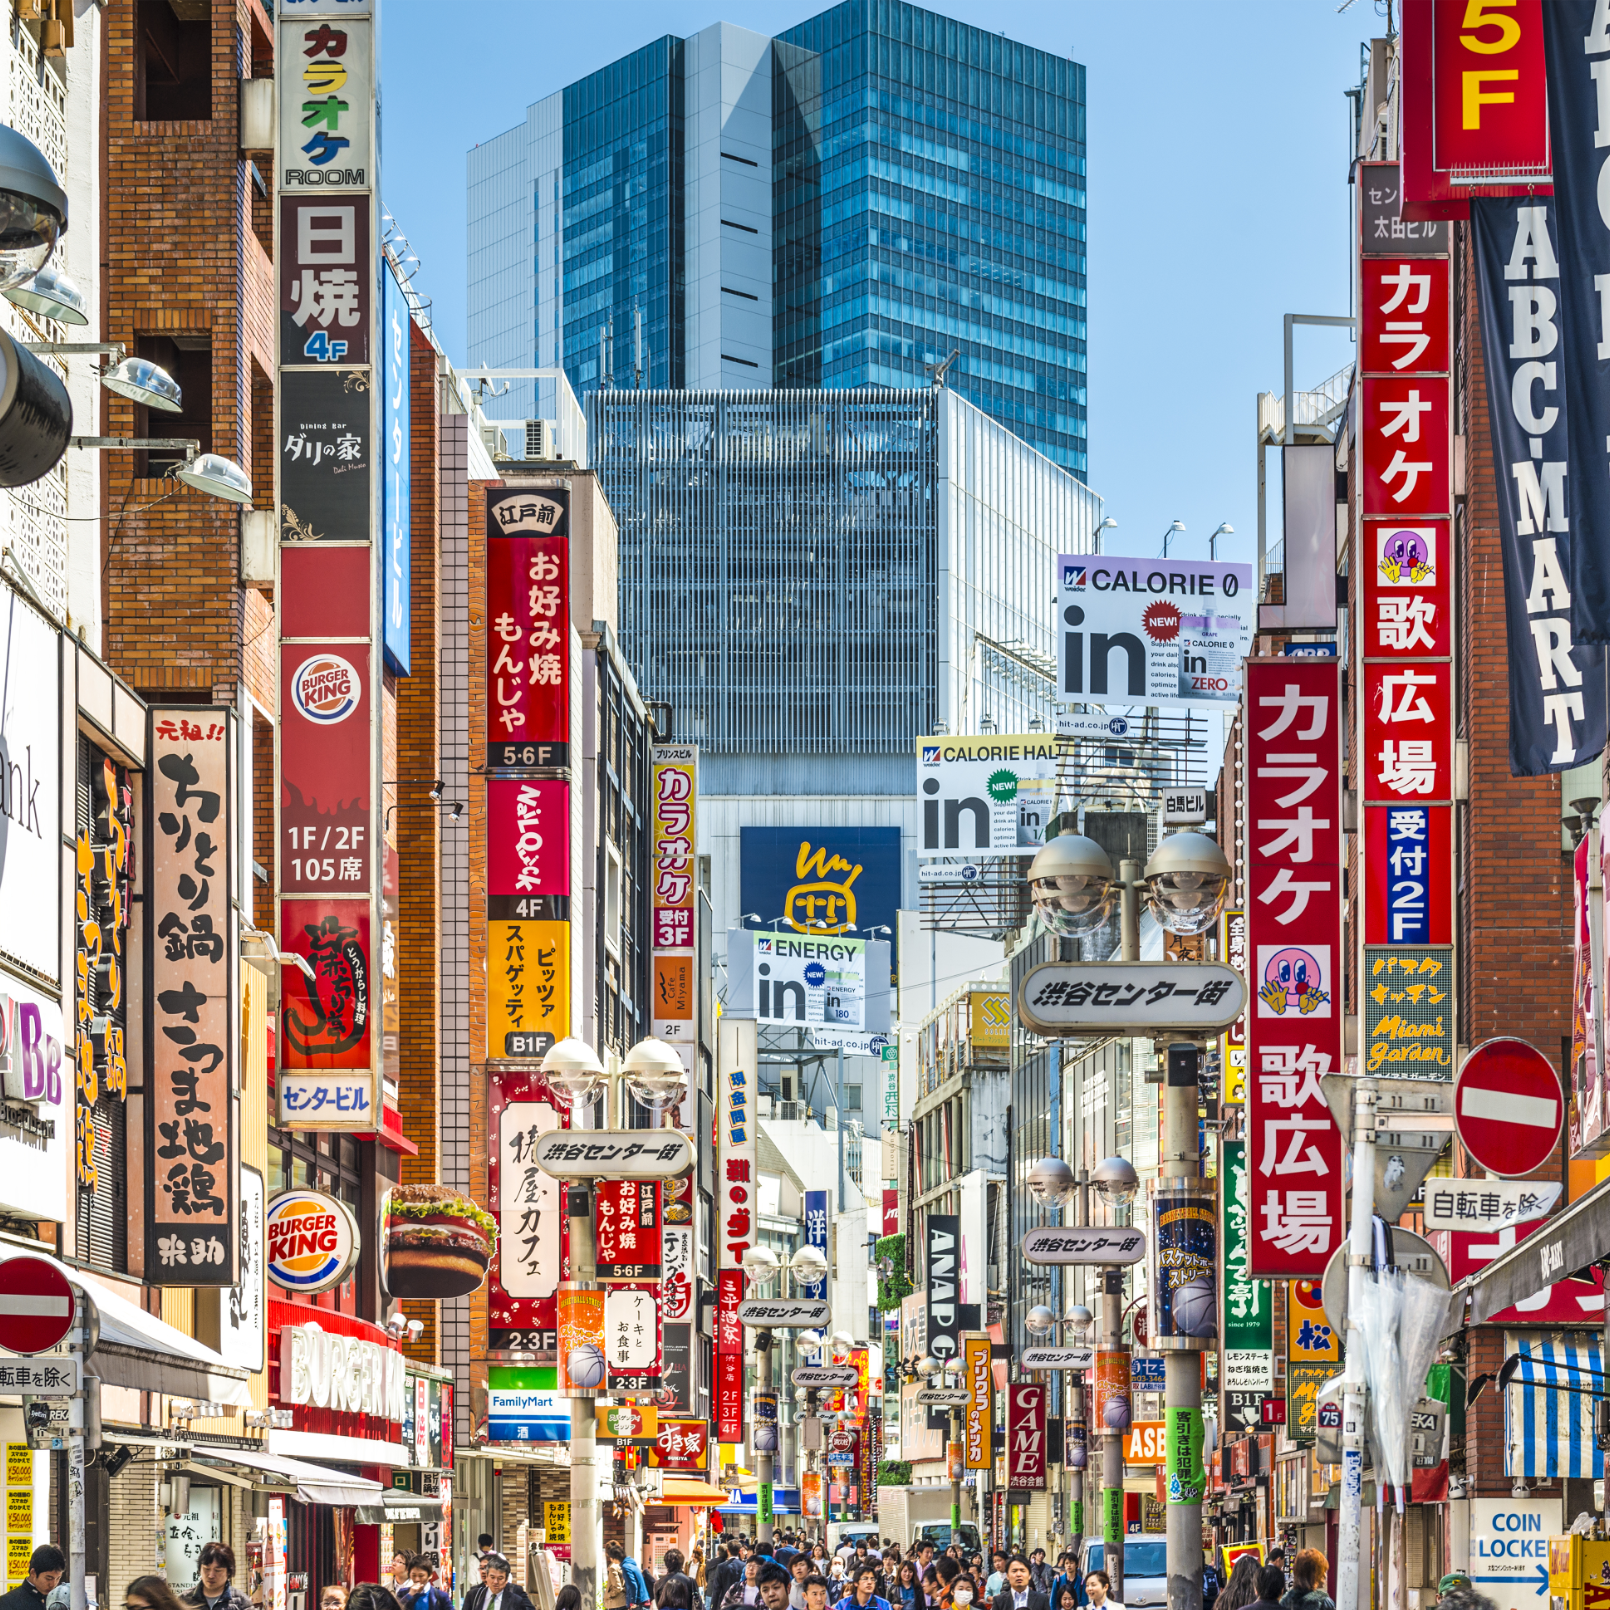 16 Government-Approved Crypto Exchanges Have Formed Self-Regulatory Group in Japan